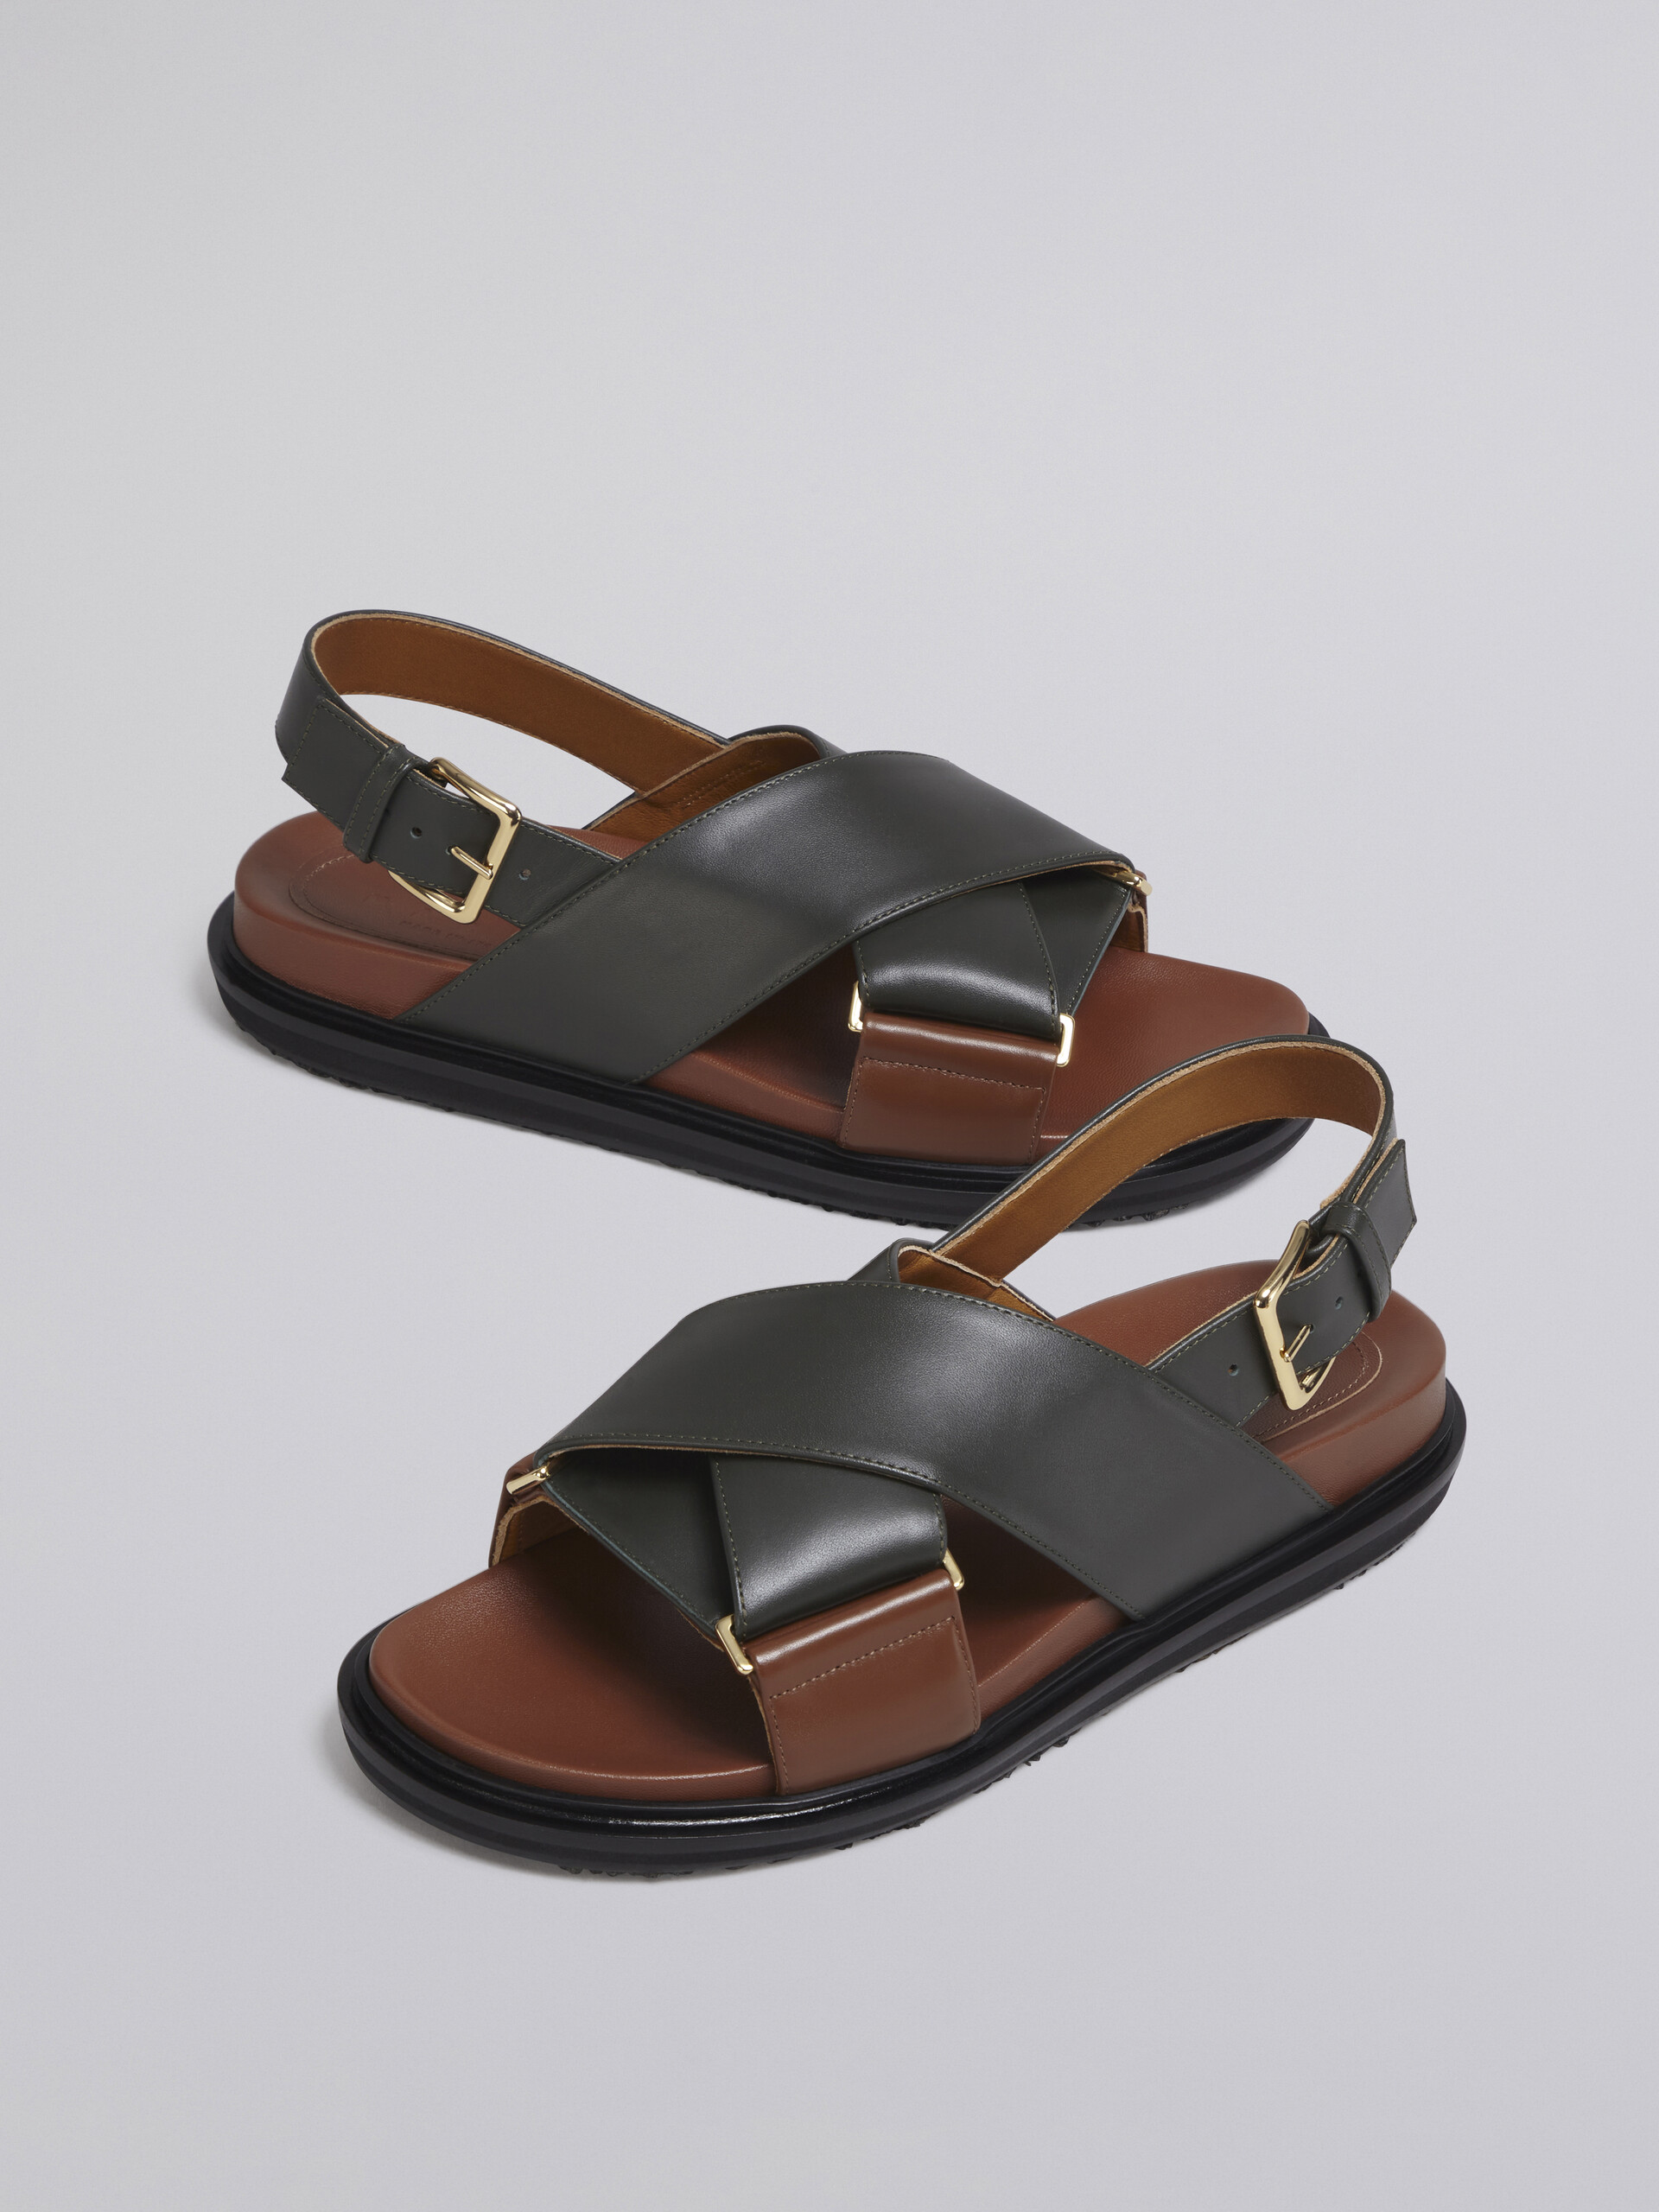 Black and brown leather Fussbett - Sandals - Image 5